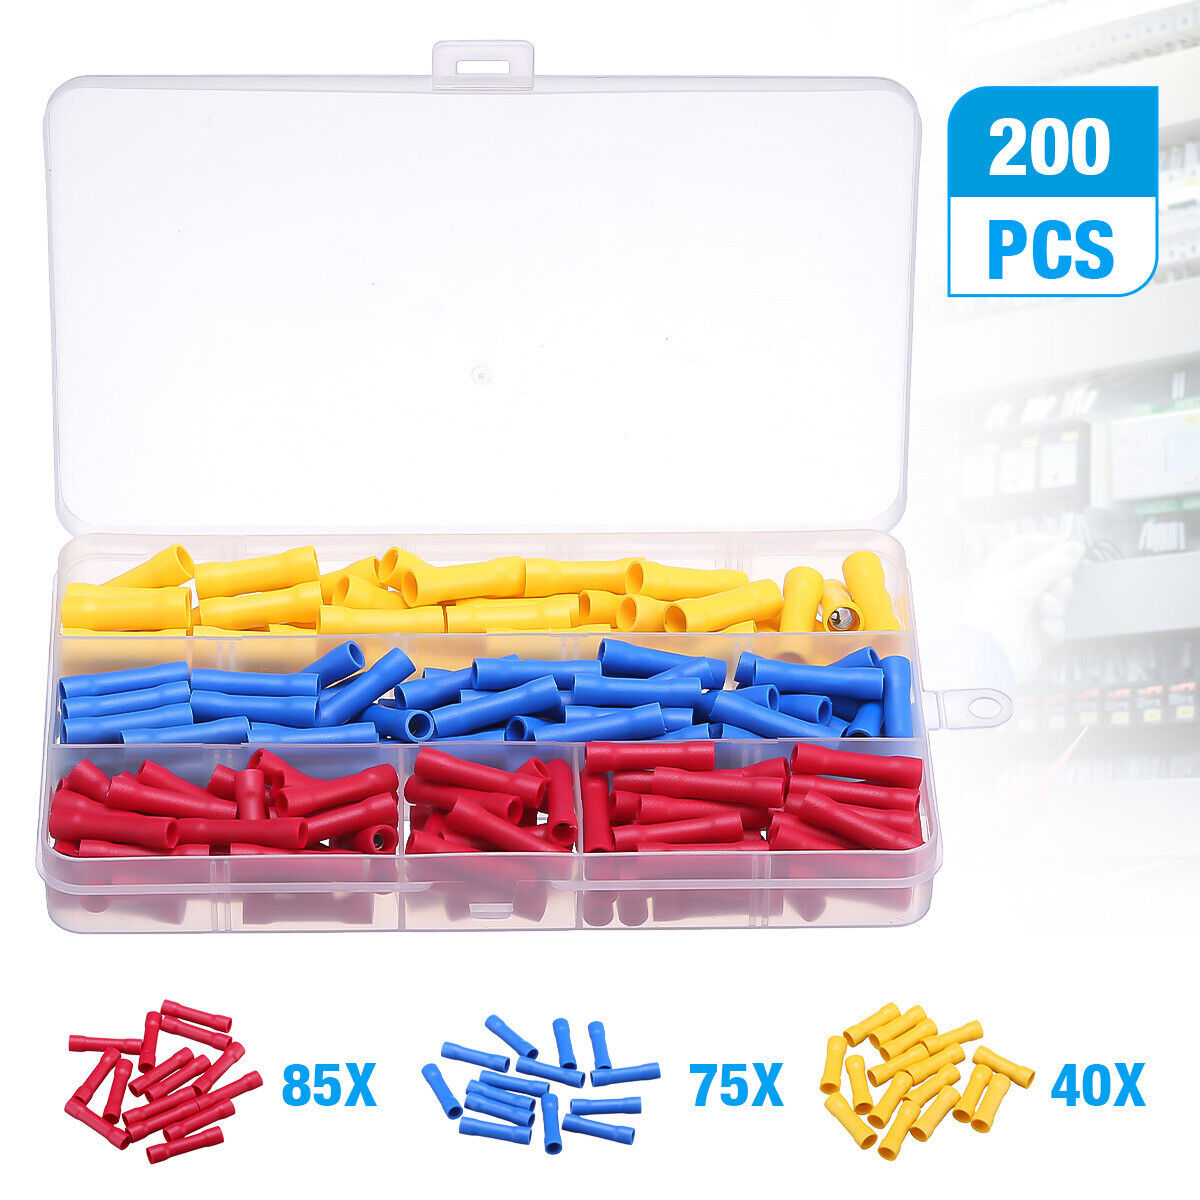 200PCS Insulated Straight Electrical Wire Butt Connectors Crimp Splice Terminals Unbranded Does not Apply - фотография #3